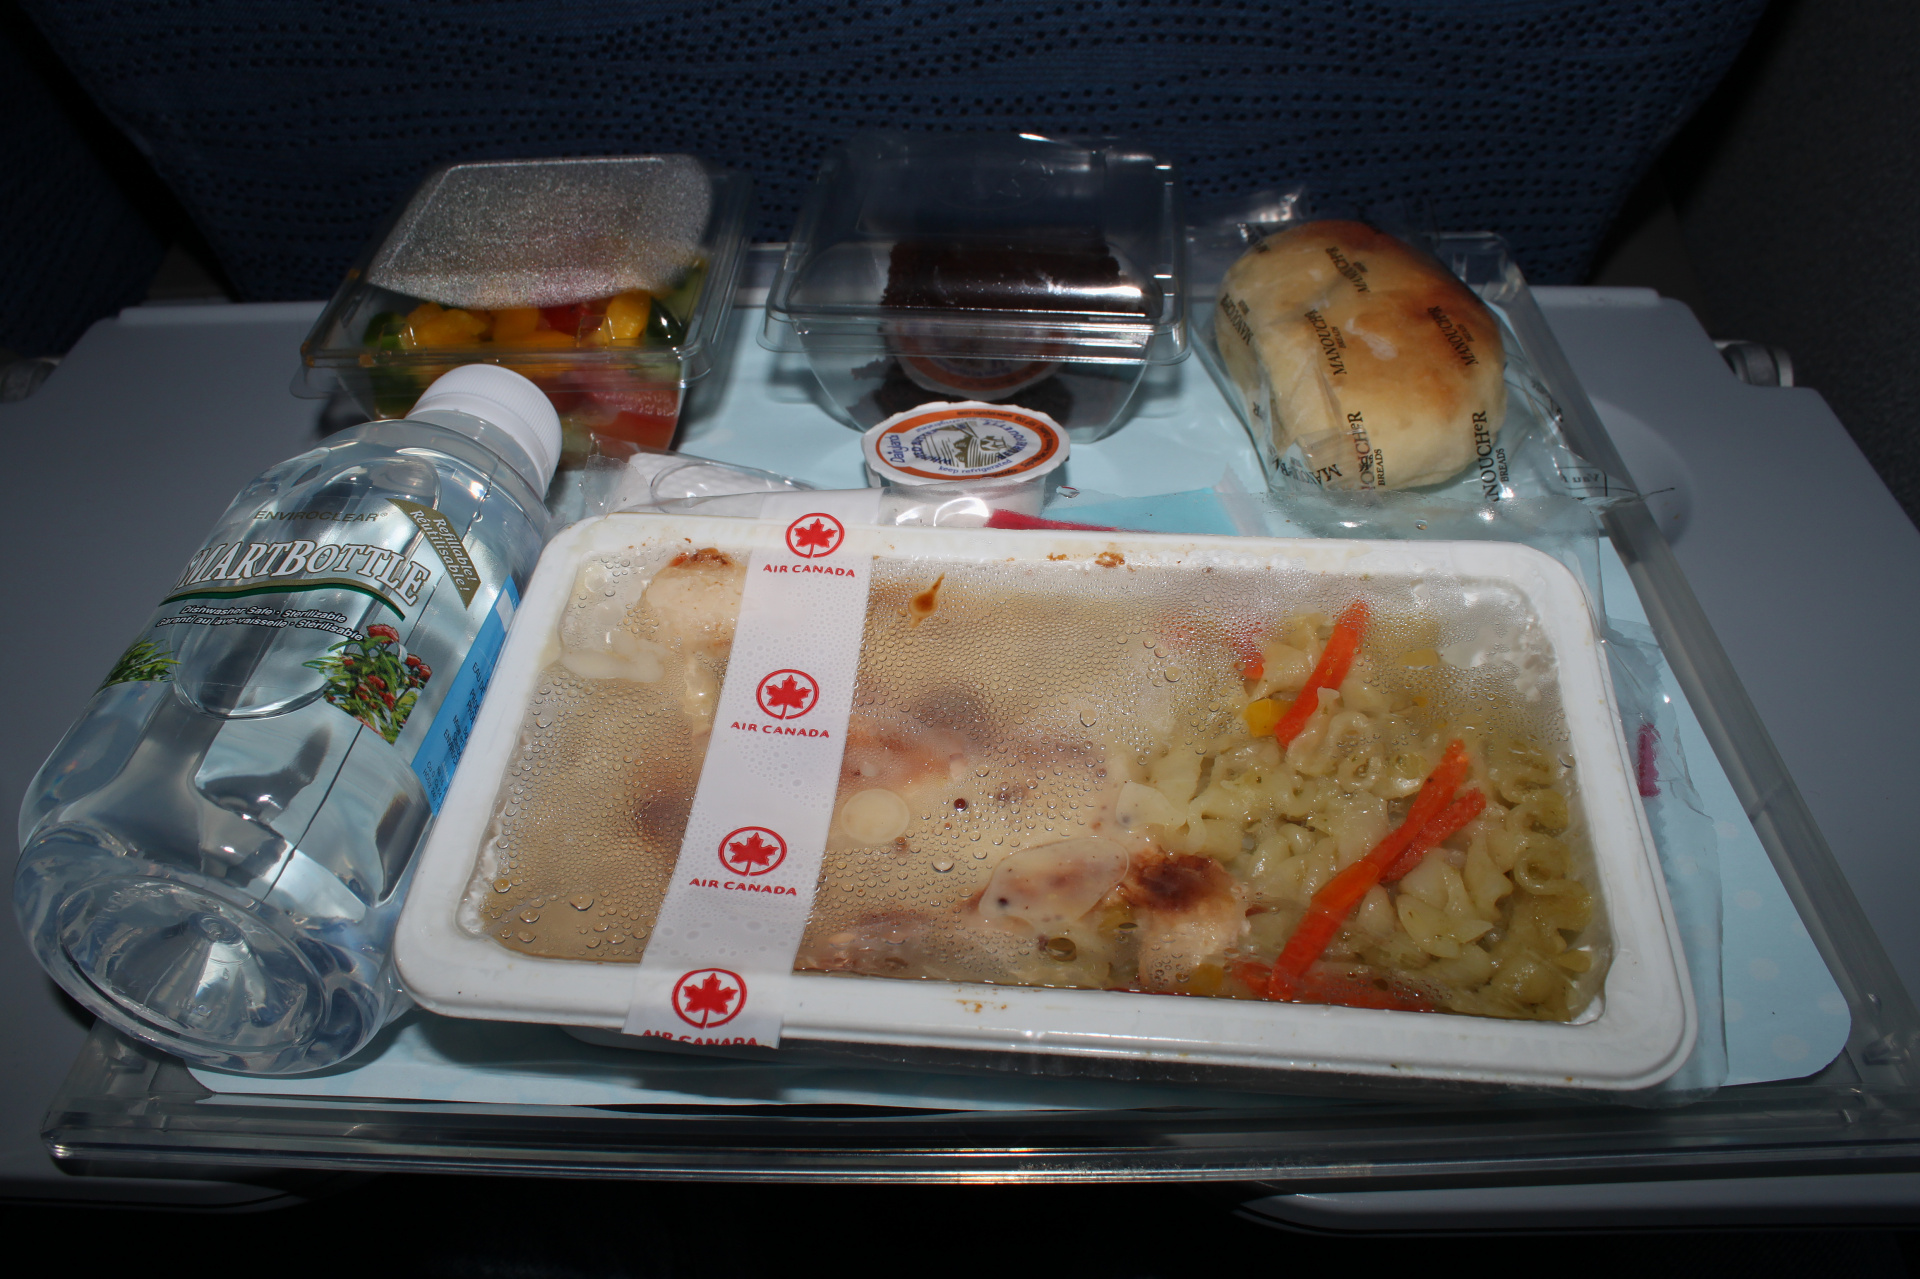 YYZ-FRA: Meal (Travels » US Trip 3: The Roads Not Taken » The Flights)